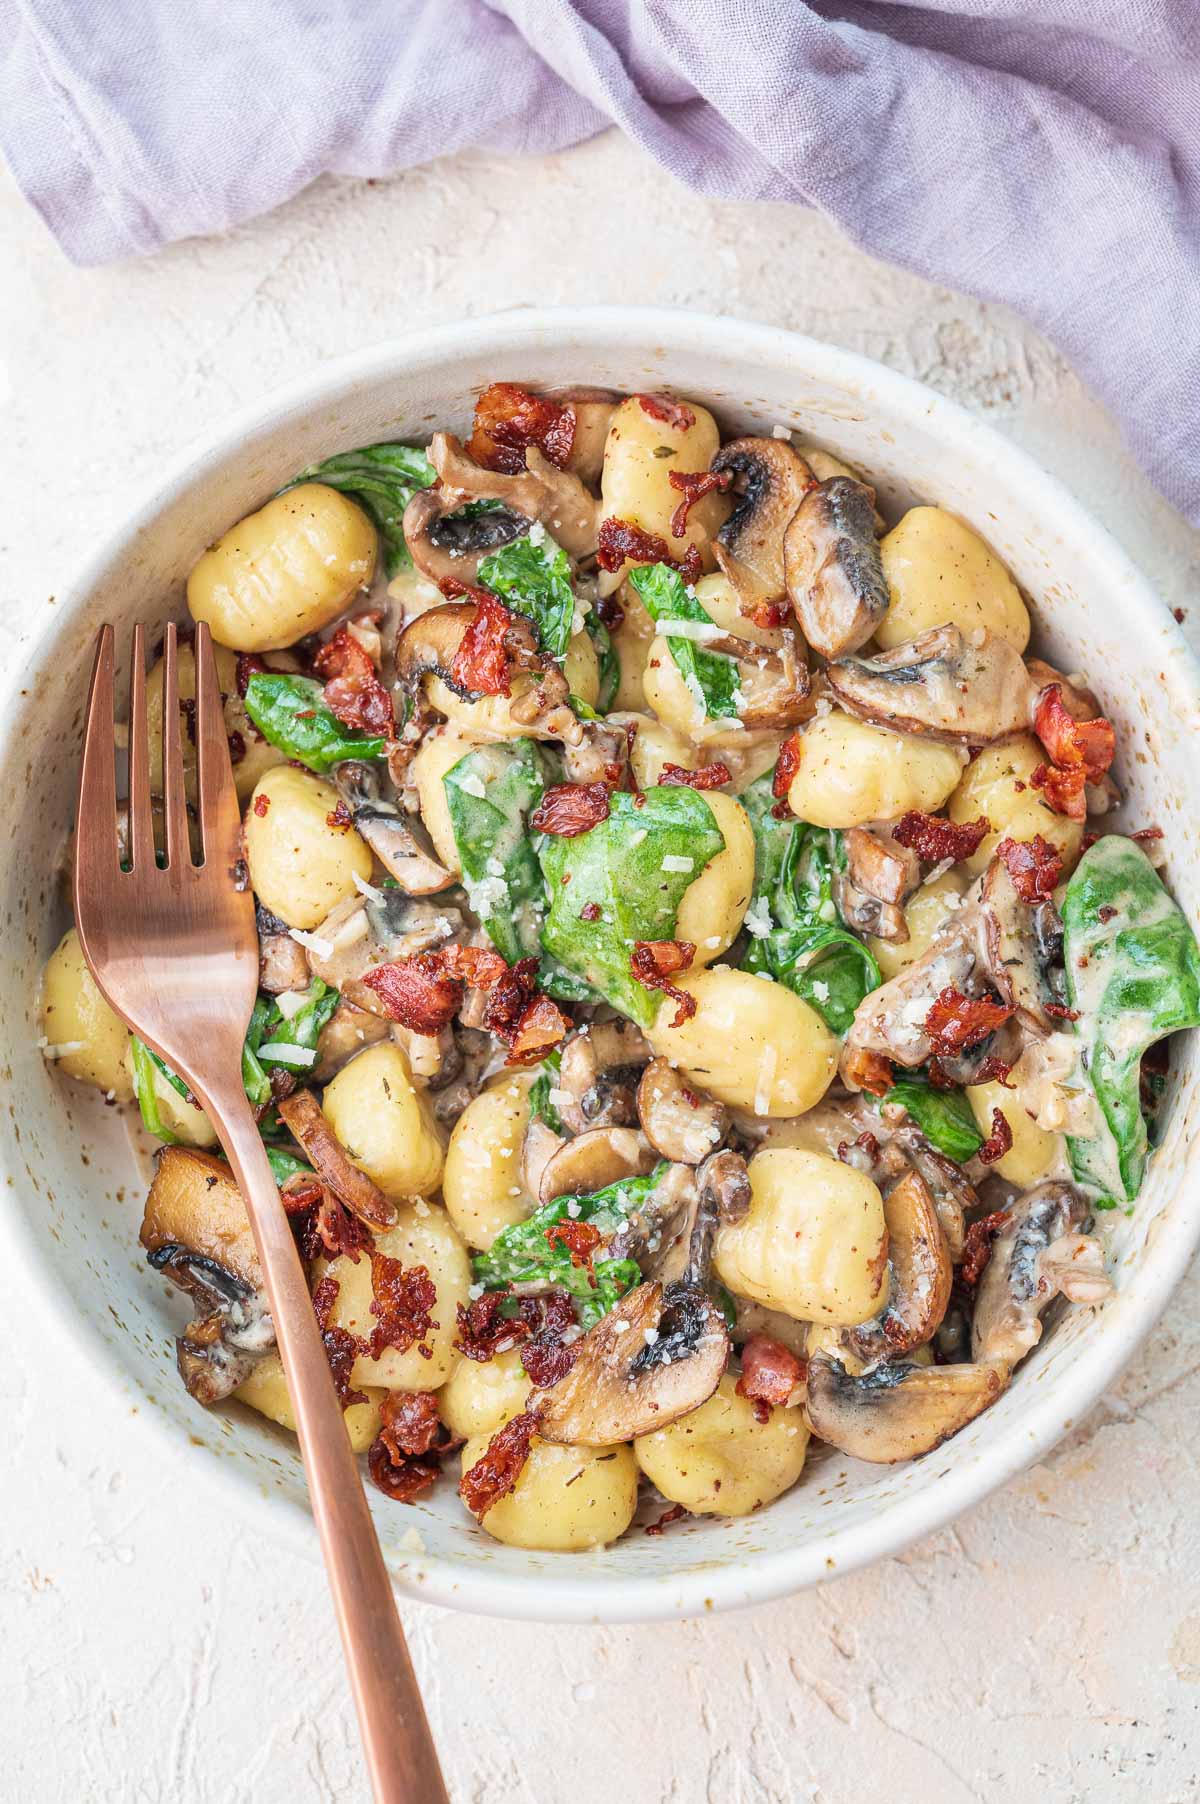 Mushroom gnocchi with spinach and bacon in a white bowl with a gold fork on a side.